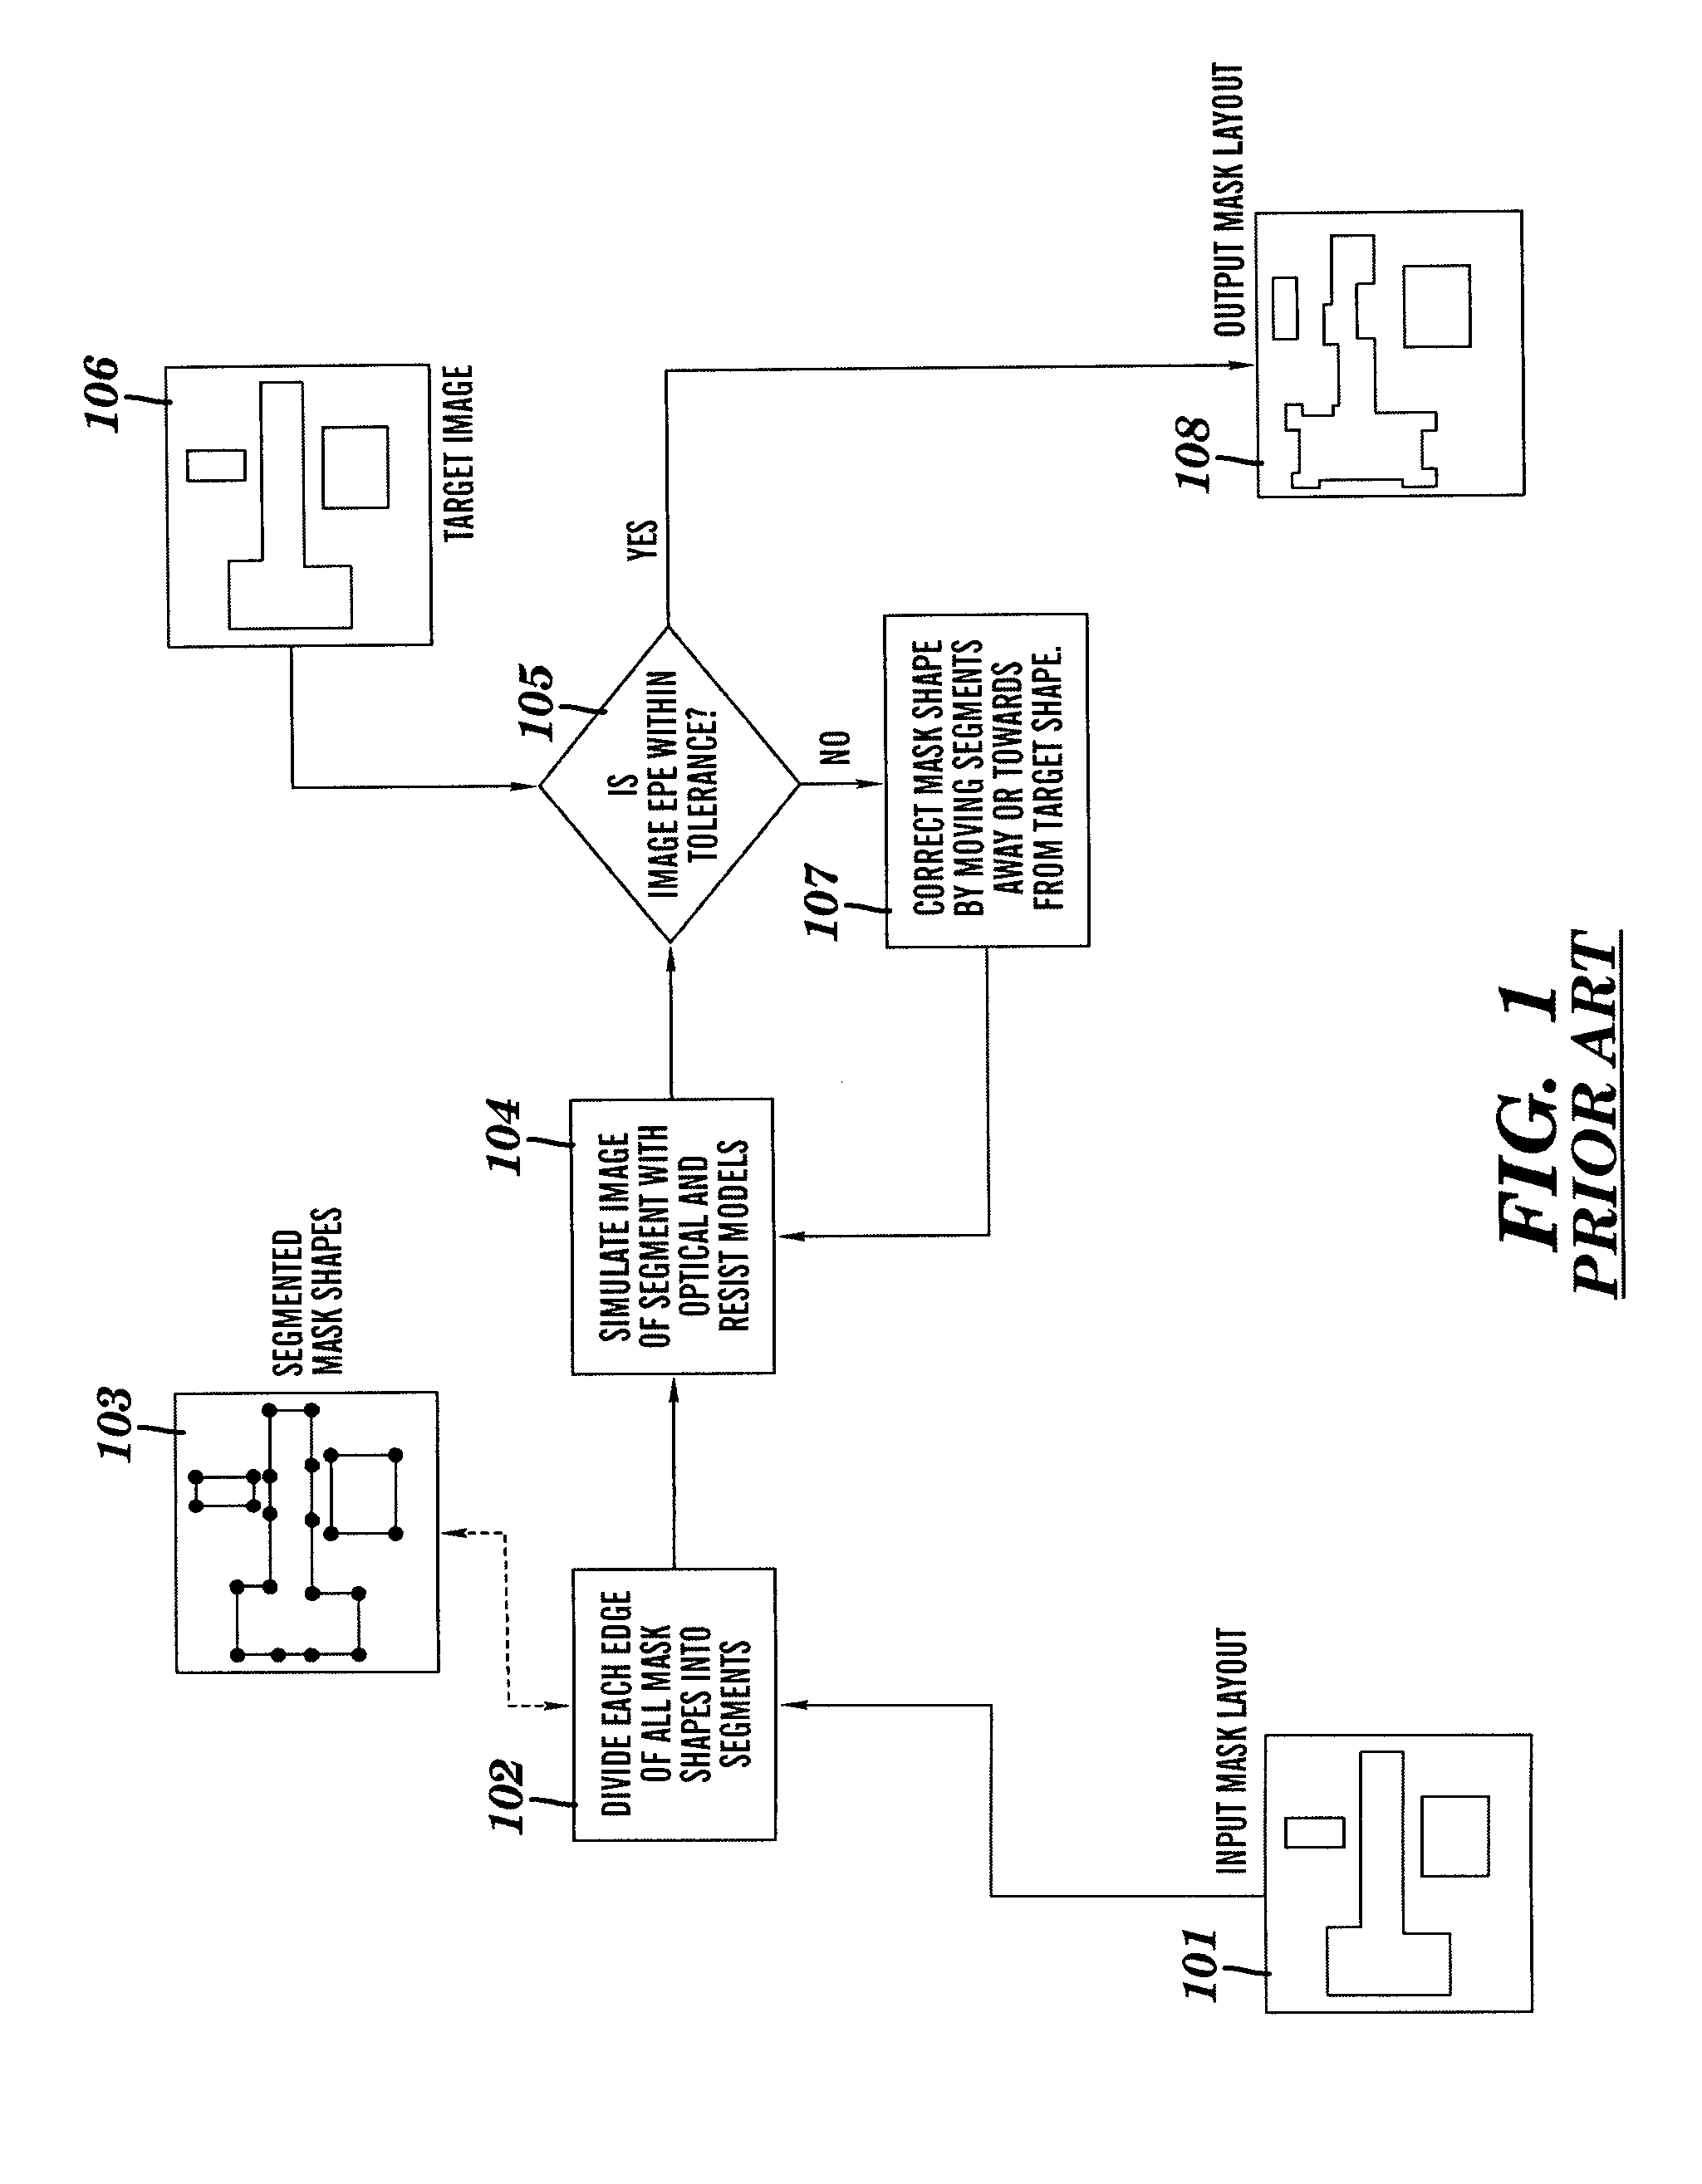 Multilayer OPC for Design Aware Manufacturing